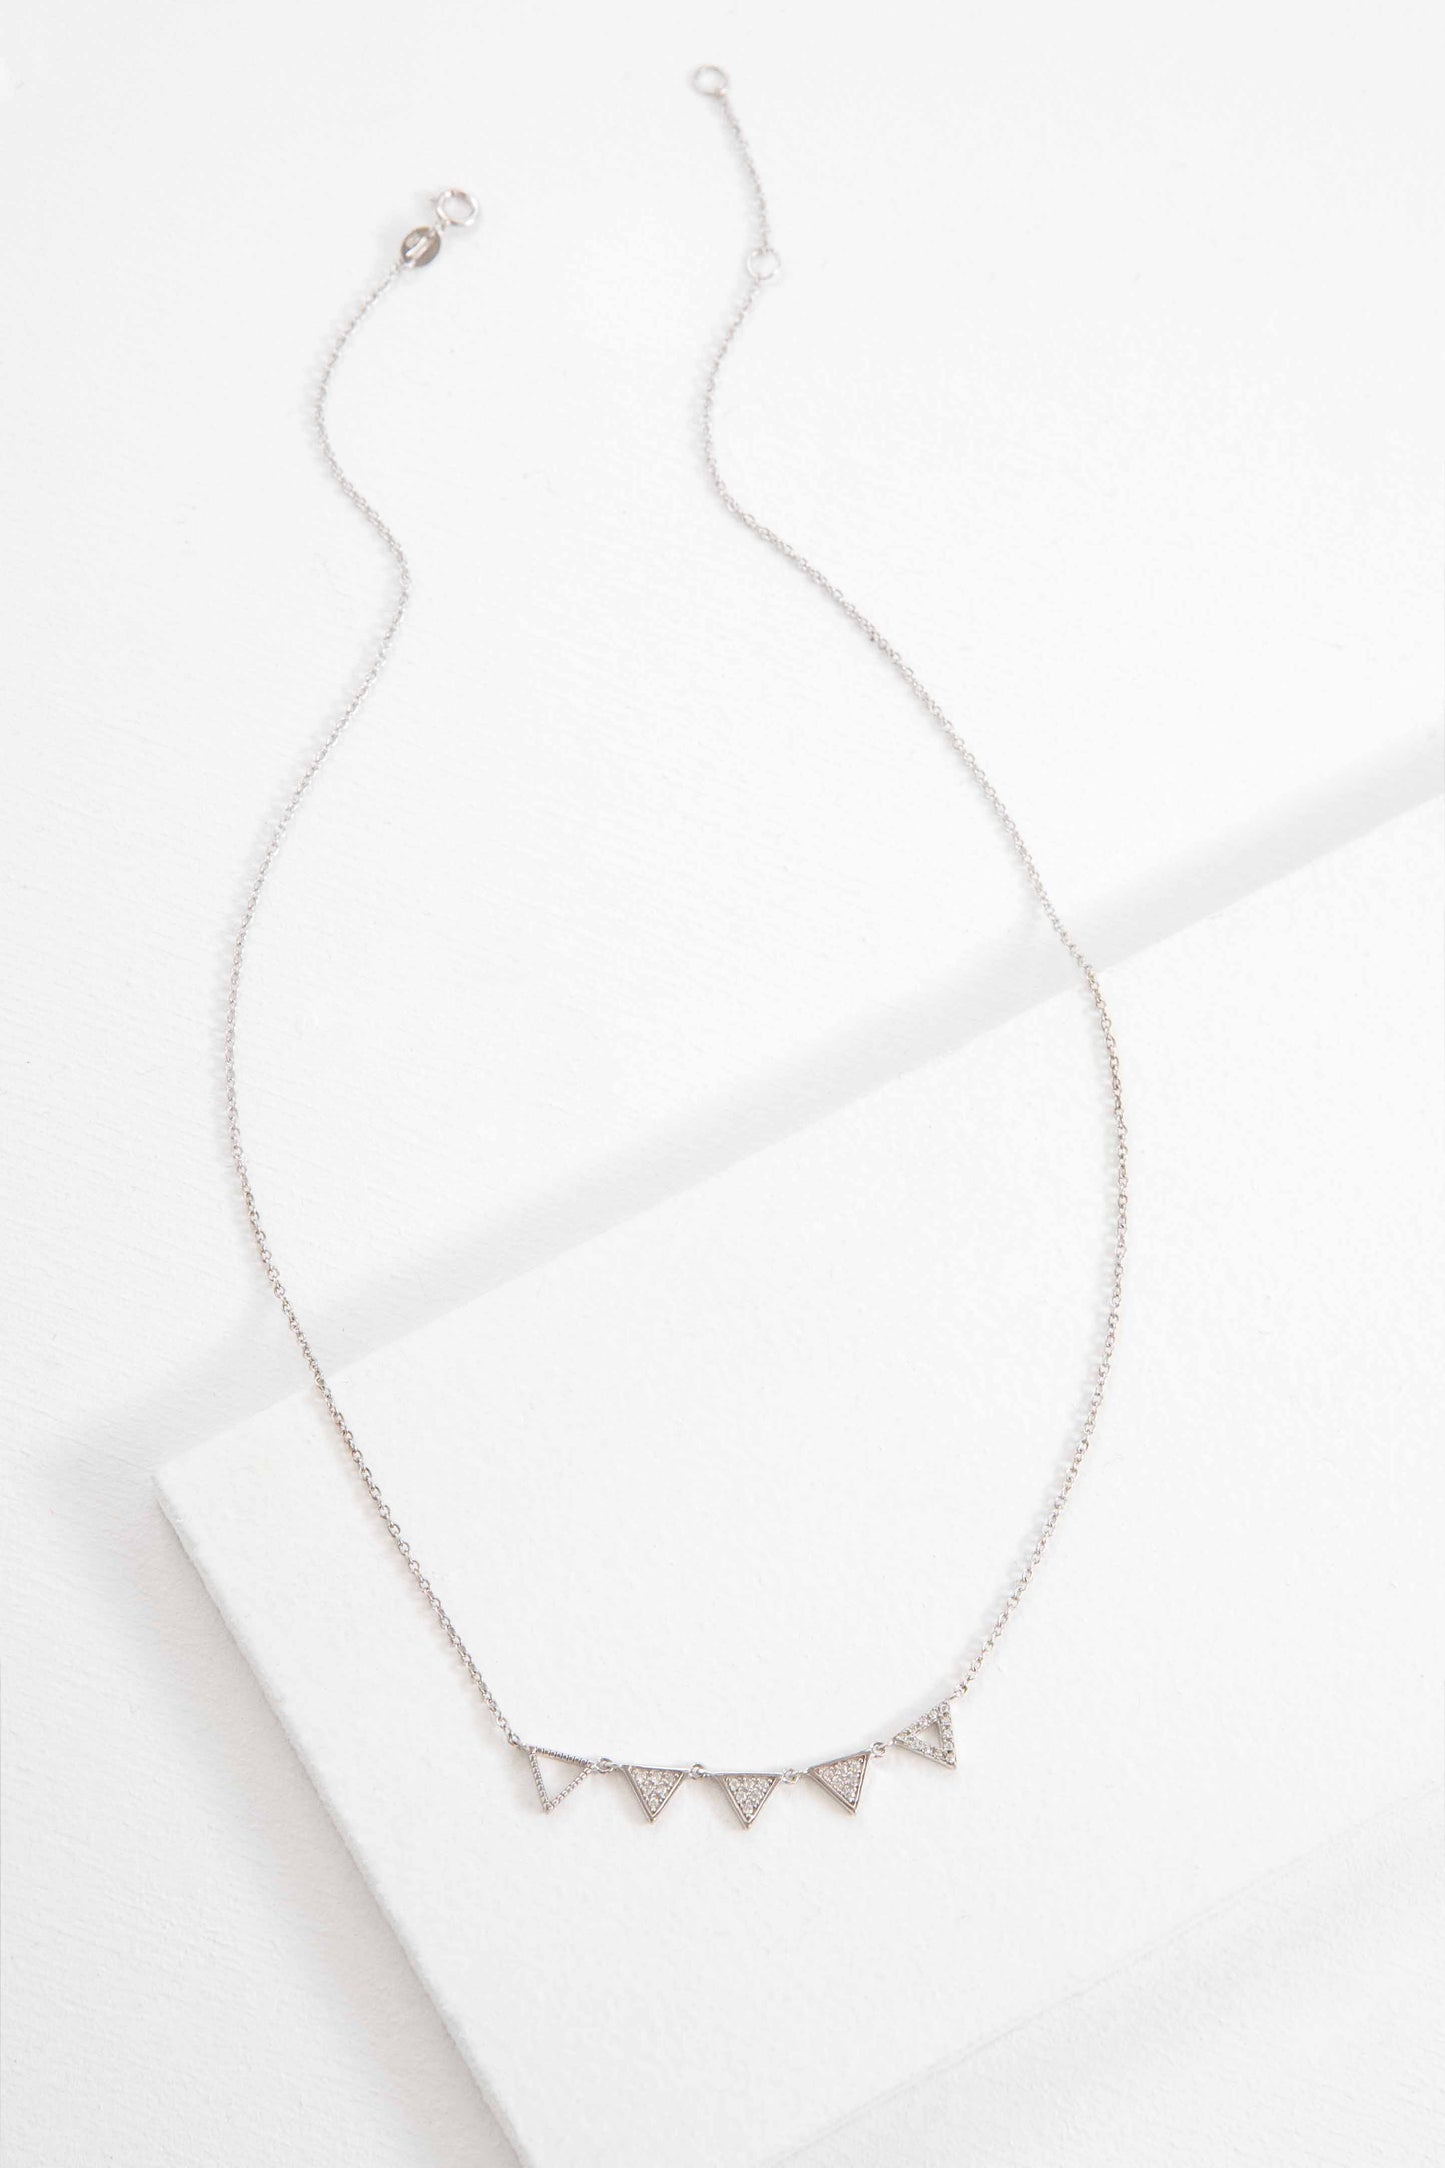 Pennant Necklace